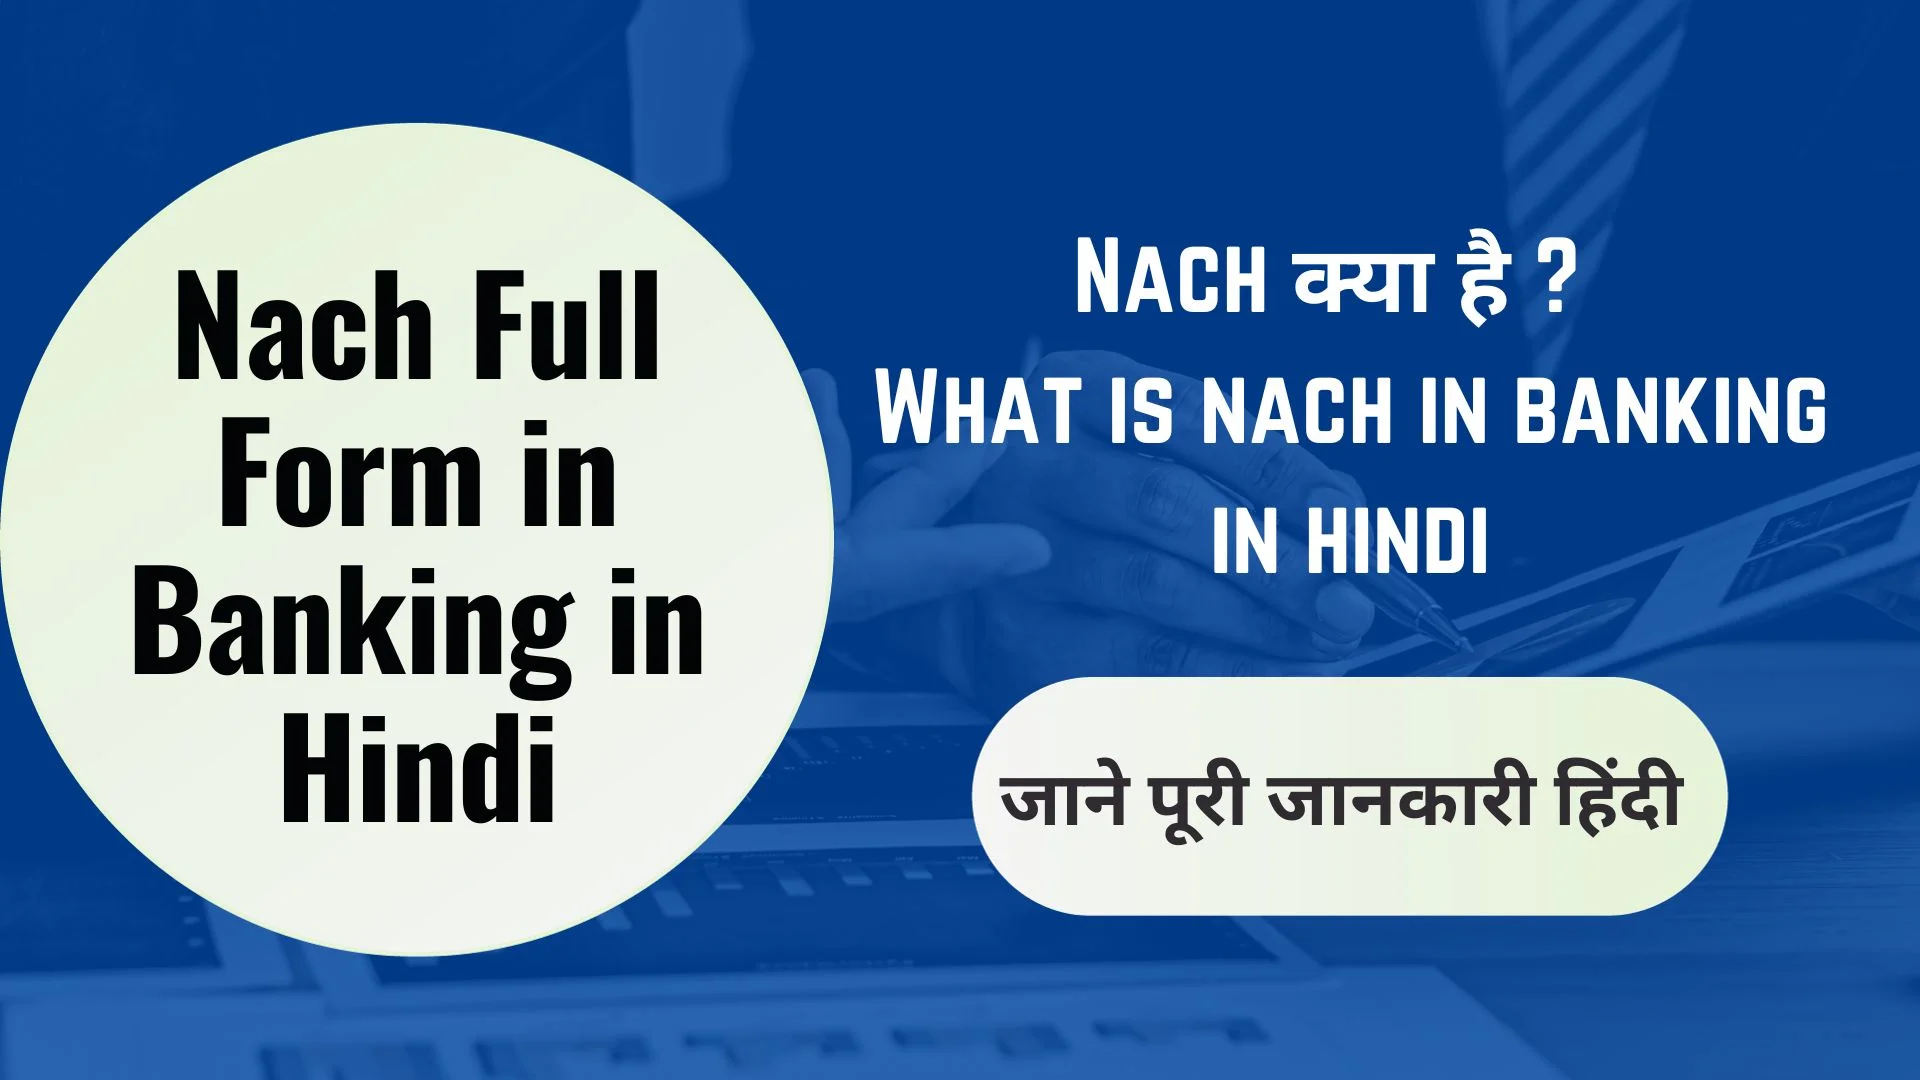 Nach Full Form in Banking in Hindi